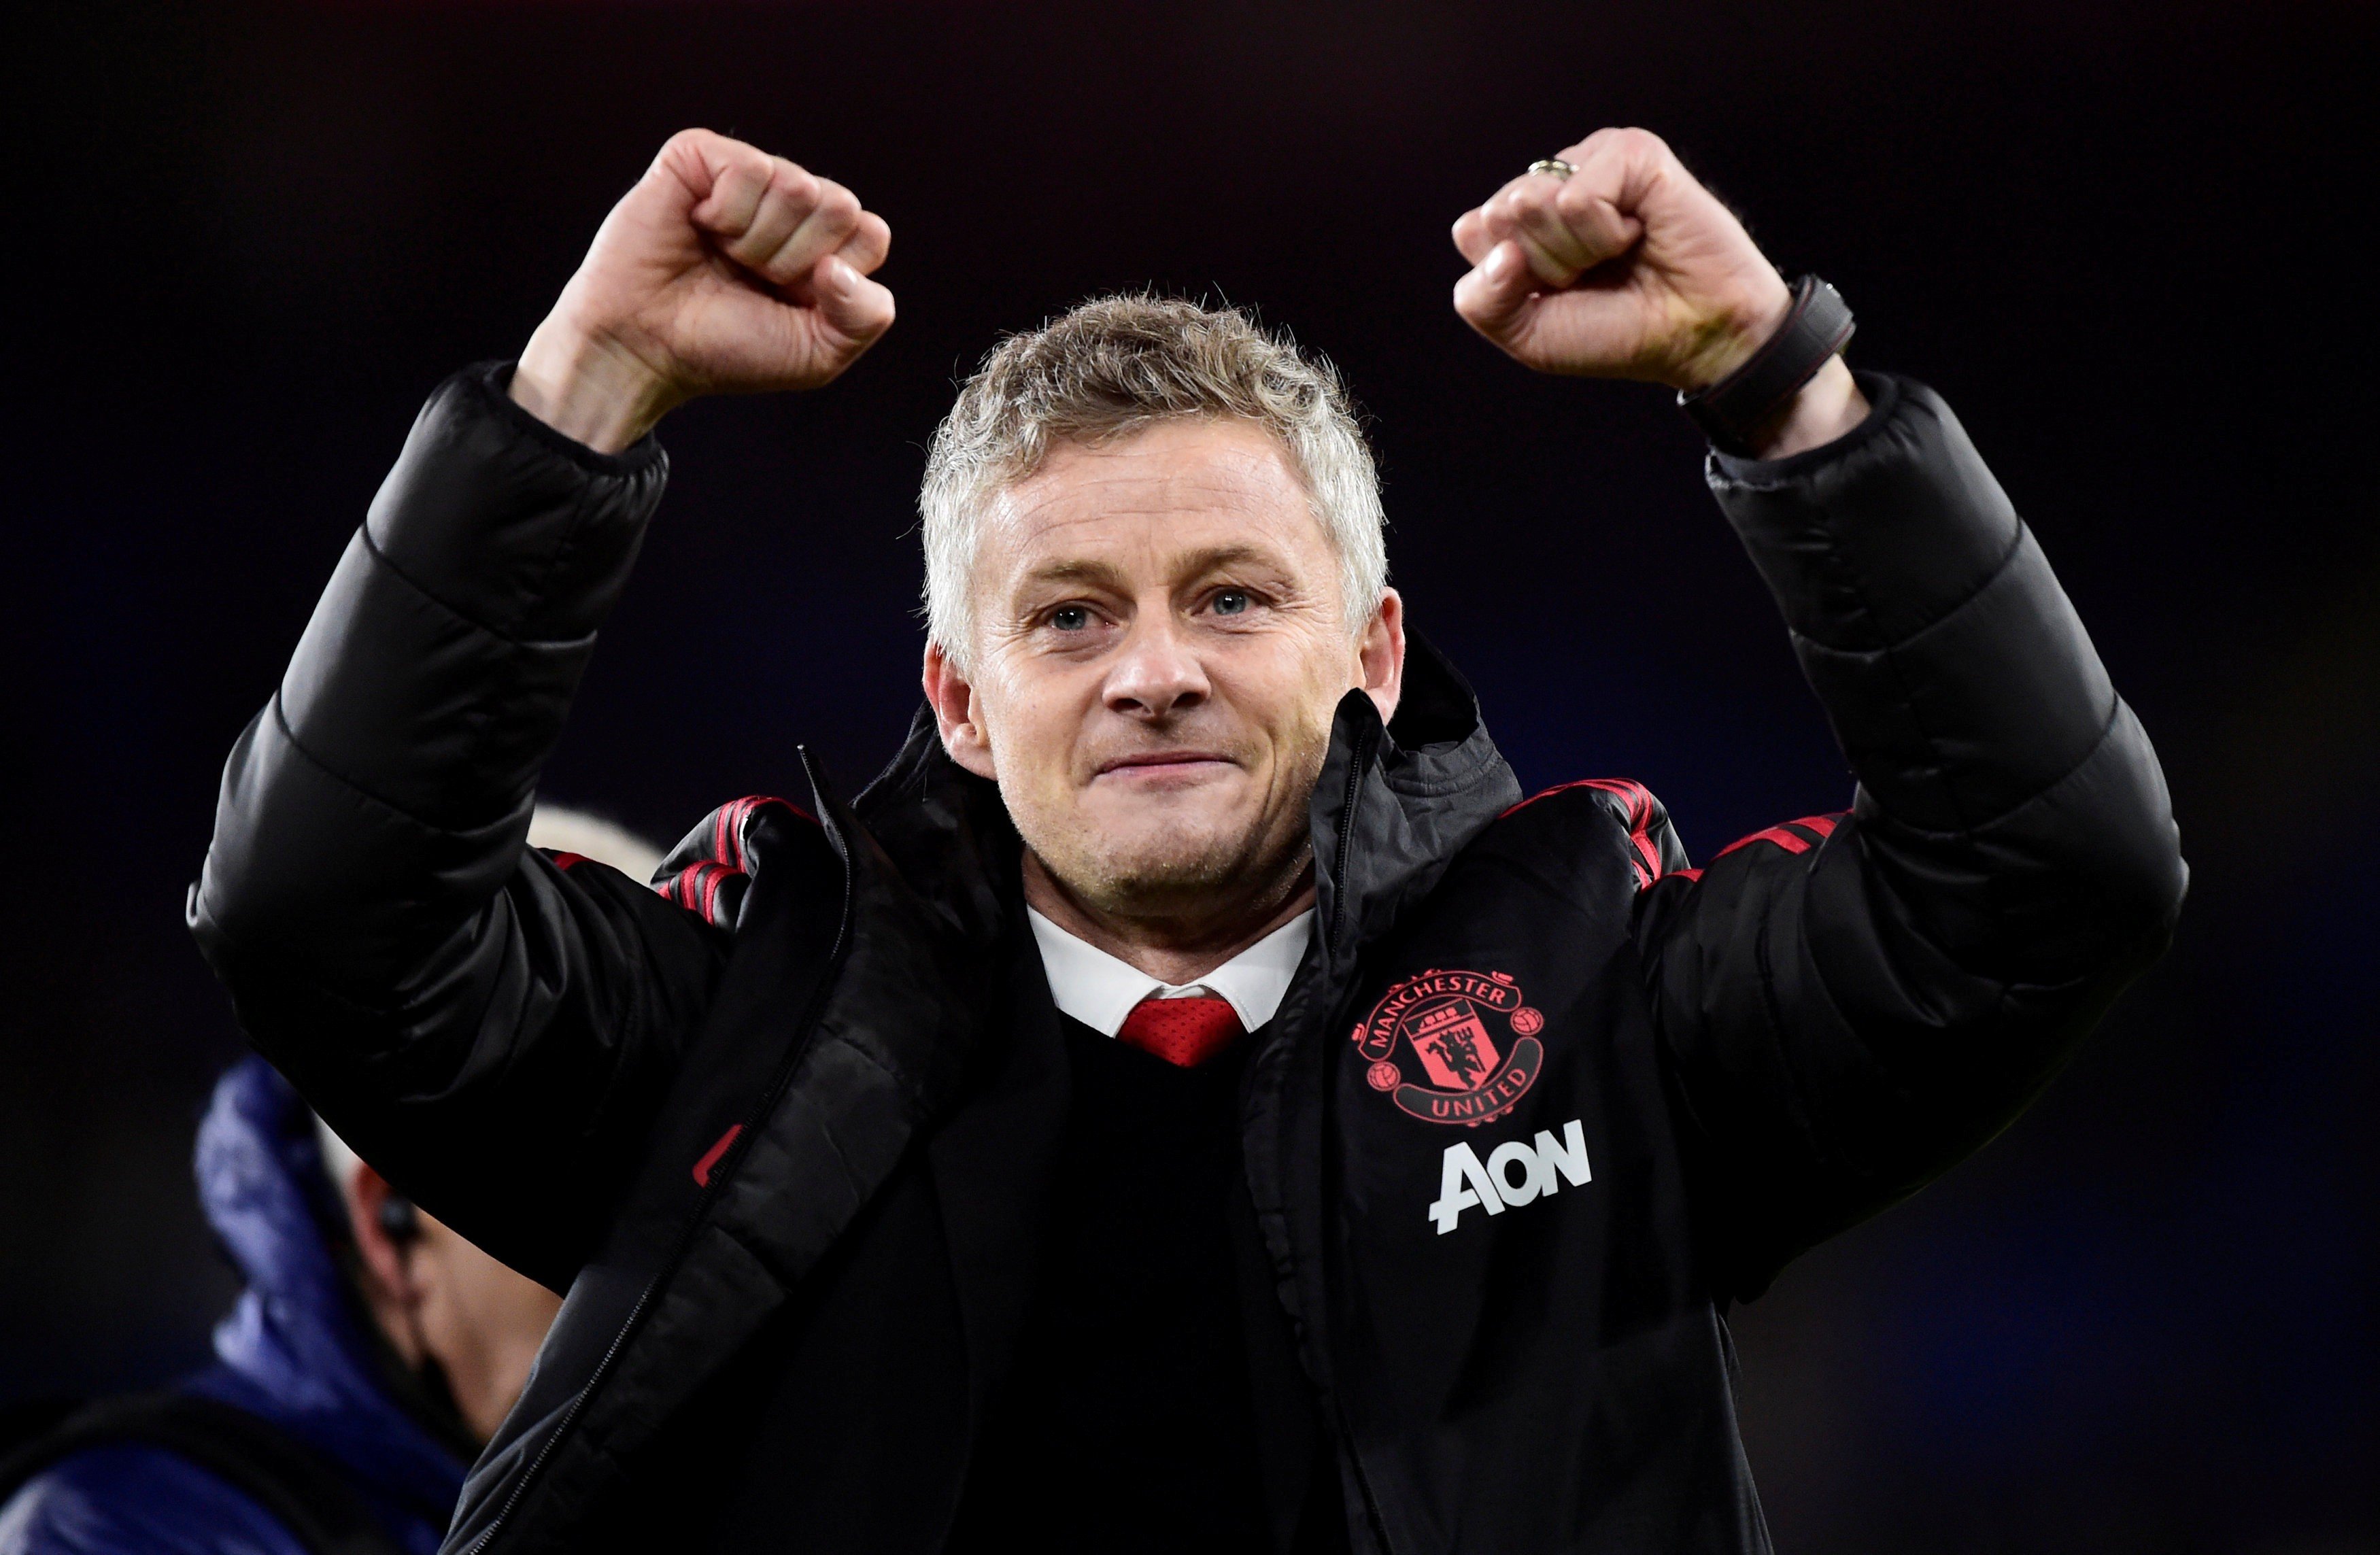 Gunnar Solskjaer is more than just a super sub; he's a super guy Manchester United legend | South China Morning Post